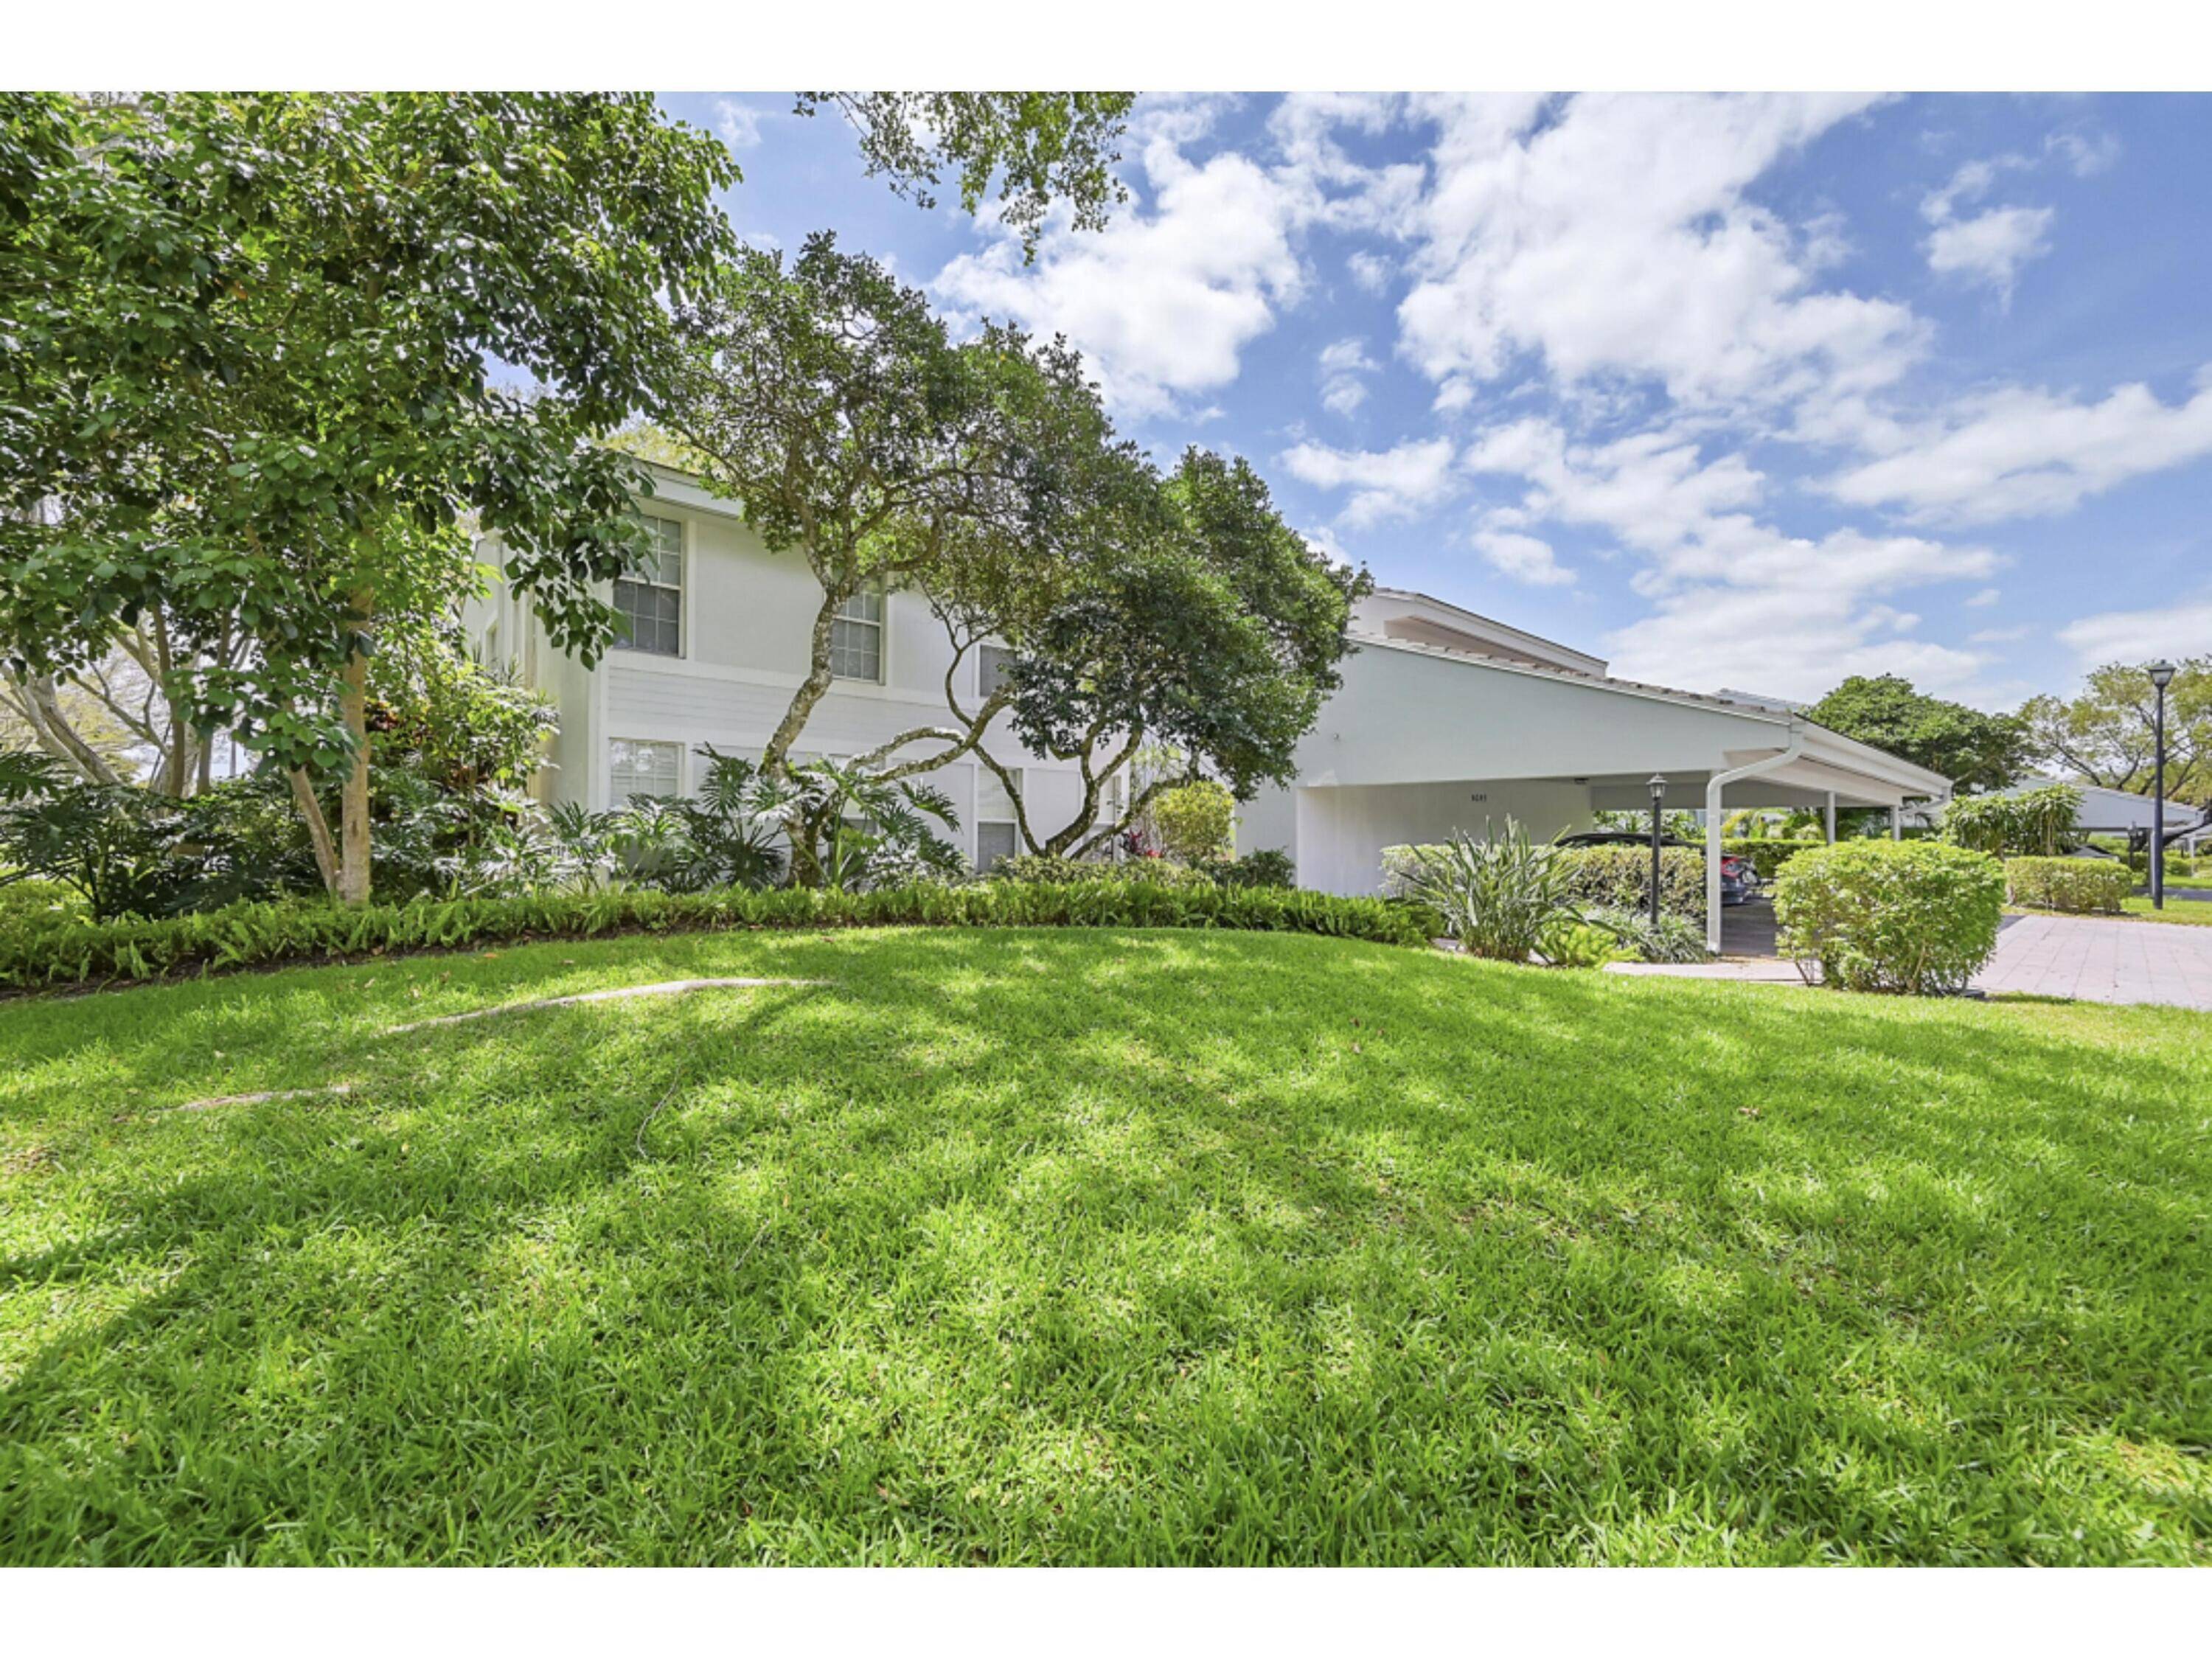 A highly desired central Boca Raton LOCATION !